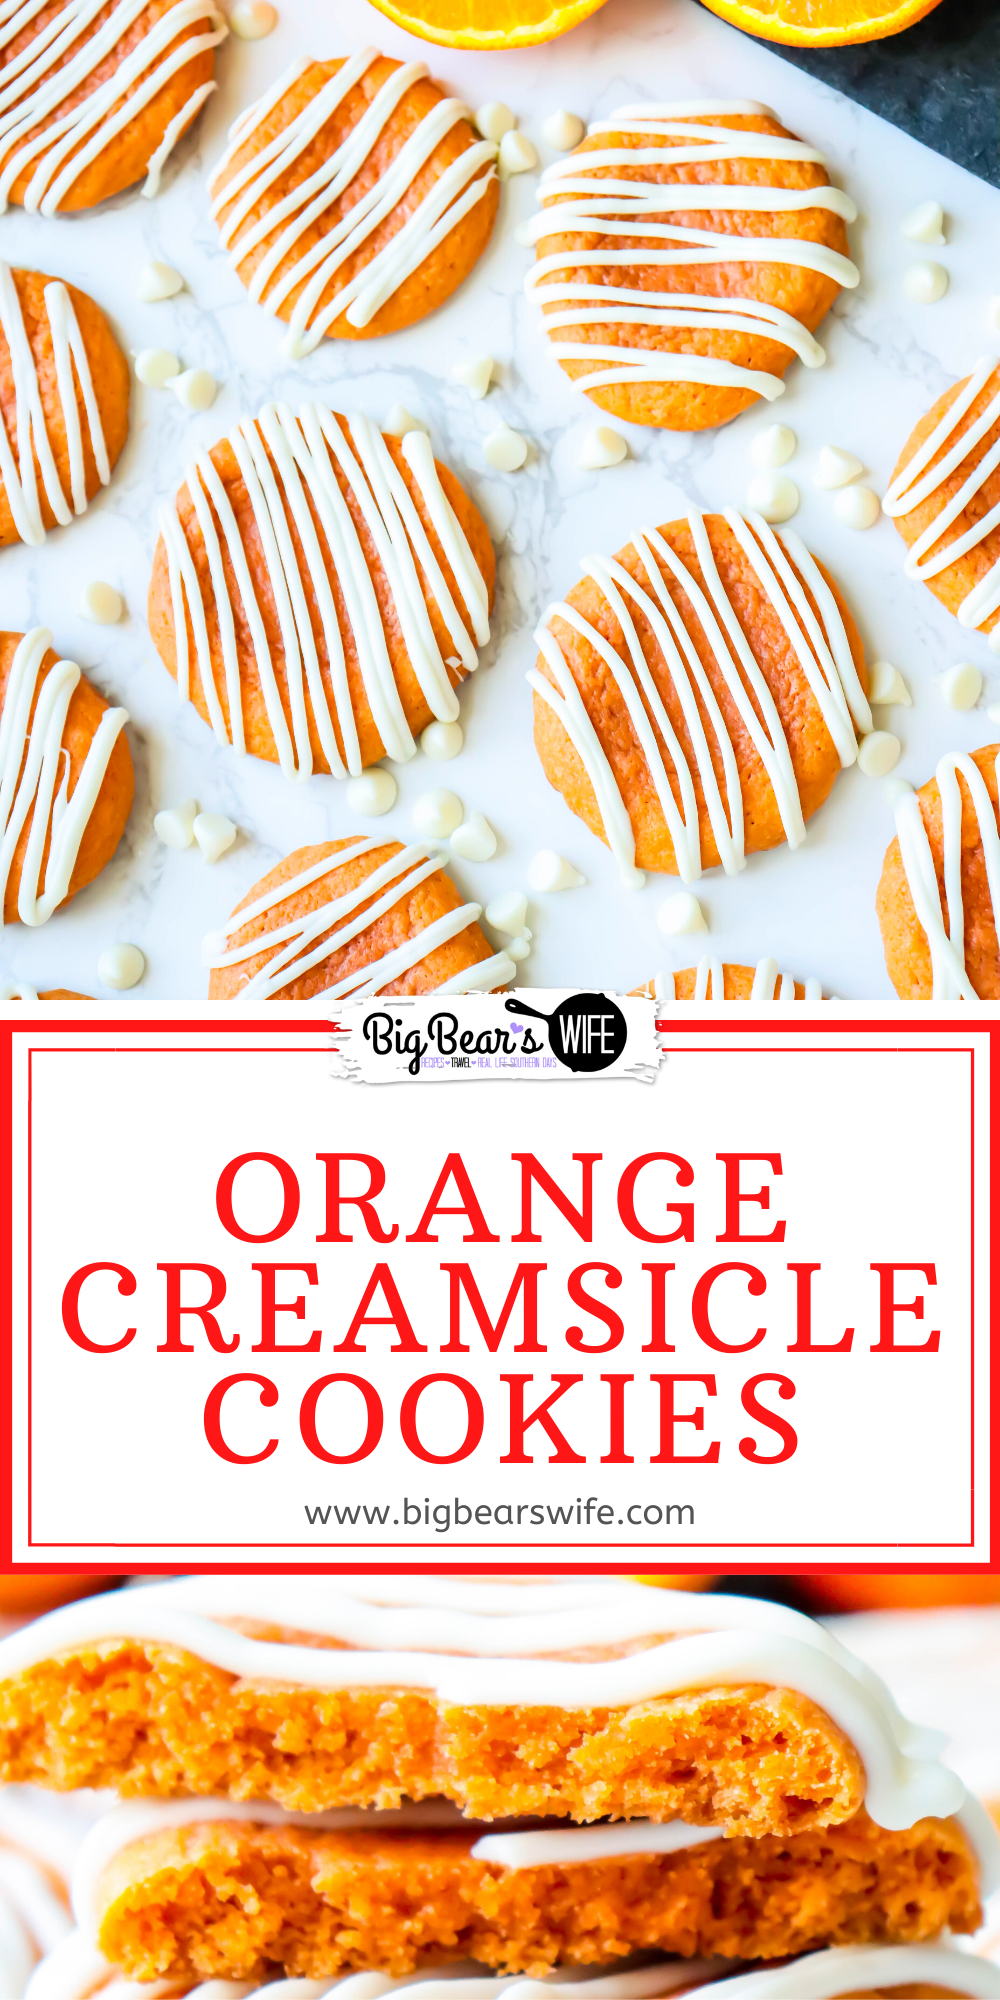 These Orange Creamsicle Cookies are the perfect combination of vanilla and orange! They’re soft, smell just like Orange Creamsicle ice cream and are topped with a white chocolate drizzle! via @bigbearswife